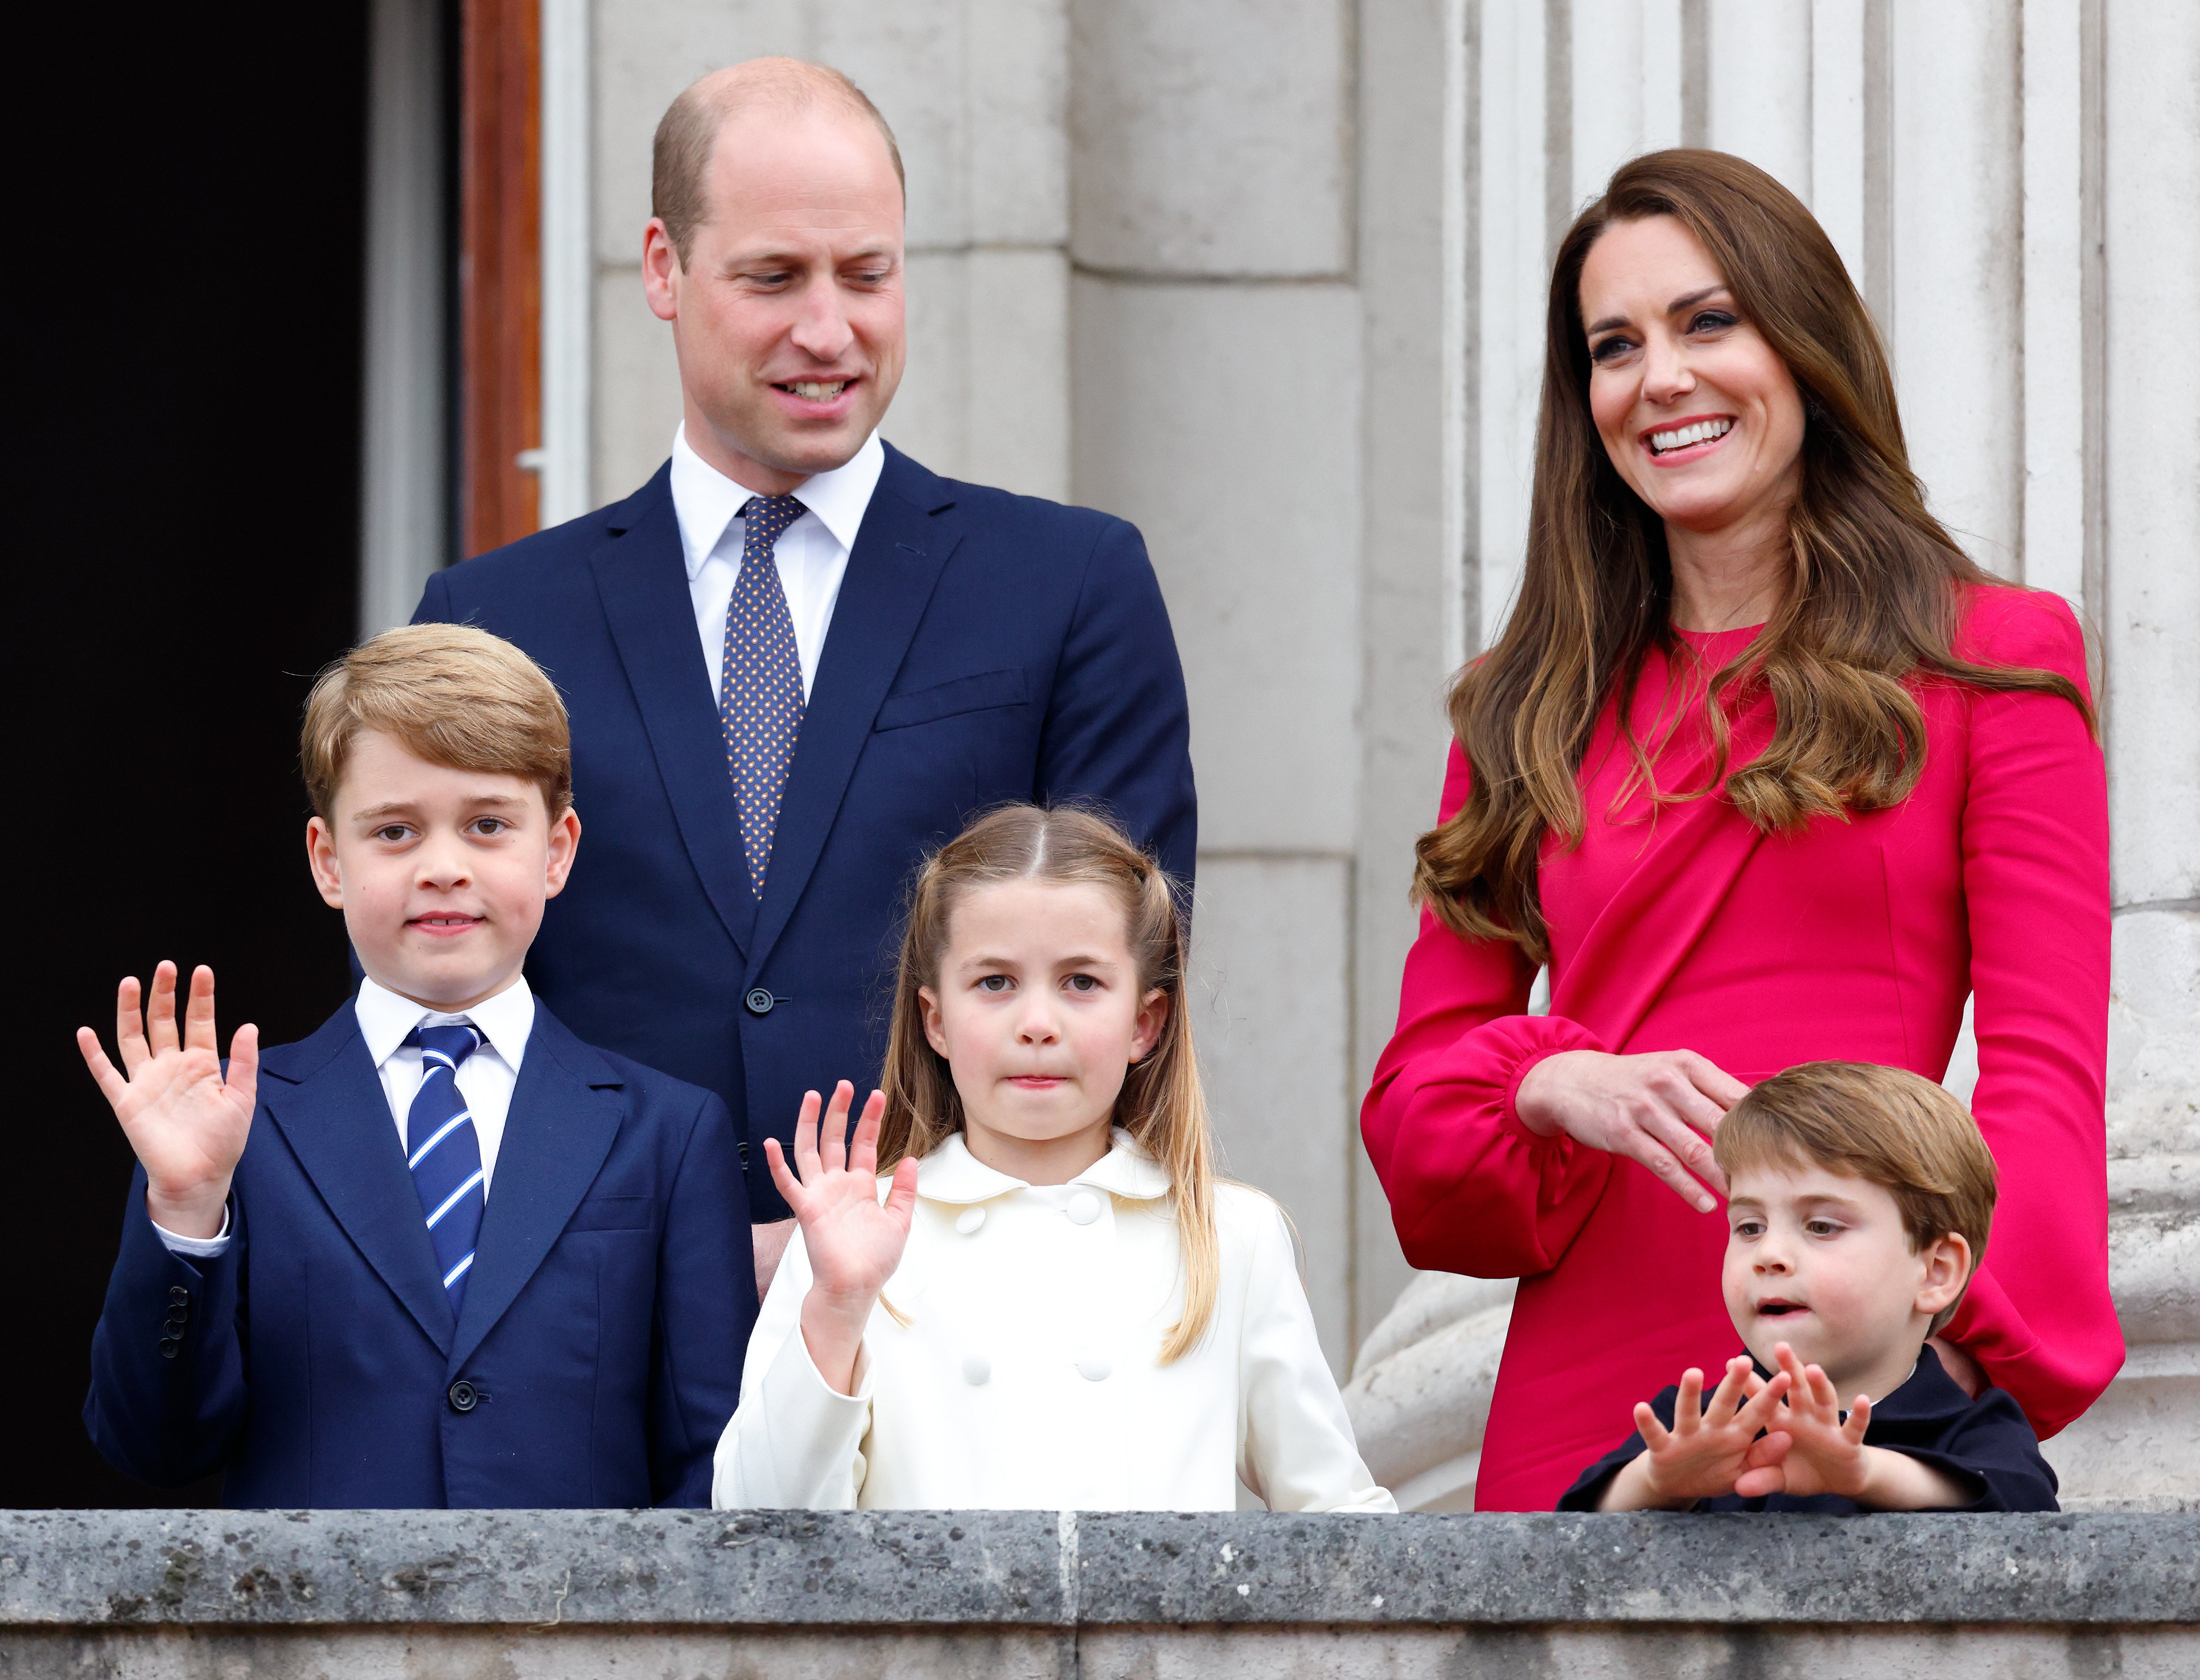 Prince George of Cambridge, Prince William, Duke of Cambridge, Princess Charlotte of Cambridge, Prince Louis of Cambridge and Catherine, Duchess of Cambridge stand on the balcony of Buckingham Palace following the Platinum Pageant on June 5, 2022 in London, England. | Source: Getty Images